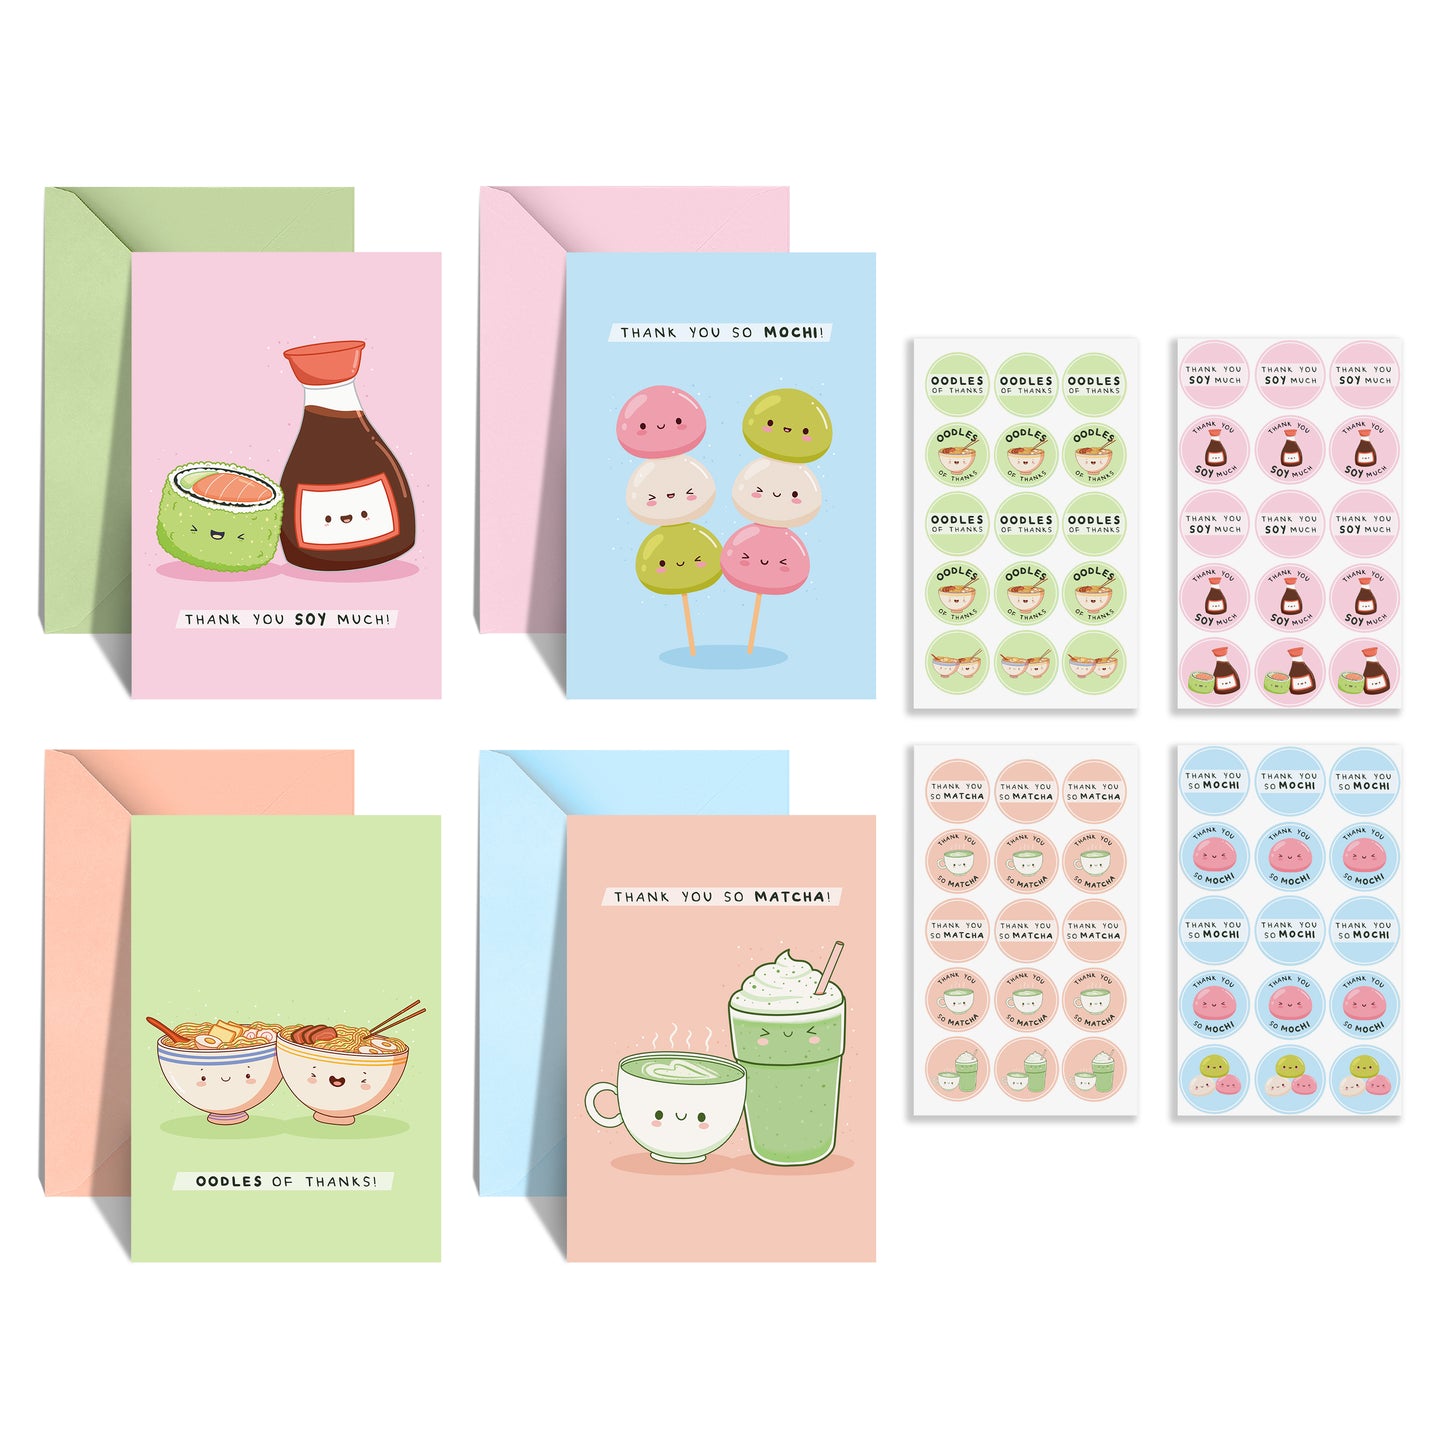 Thank You Cards Multipack - Cute Kawaii Cards - Pack of 48 cards 4 designs